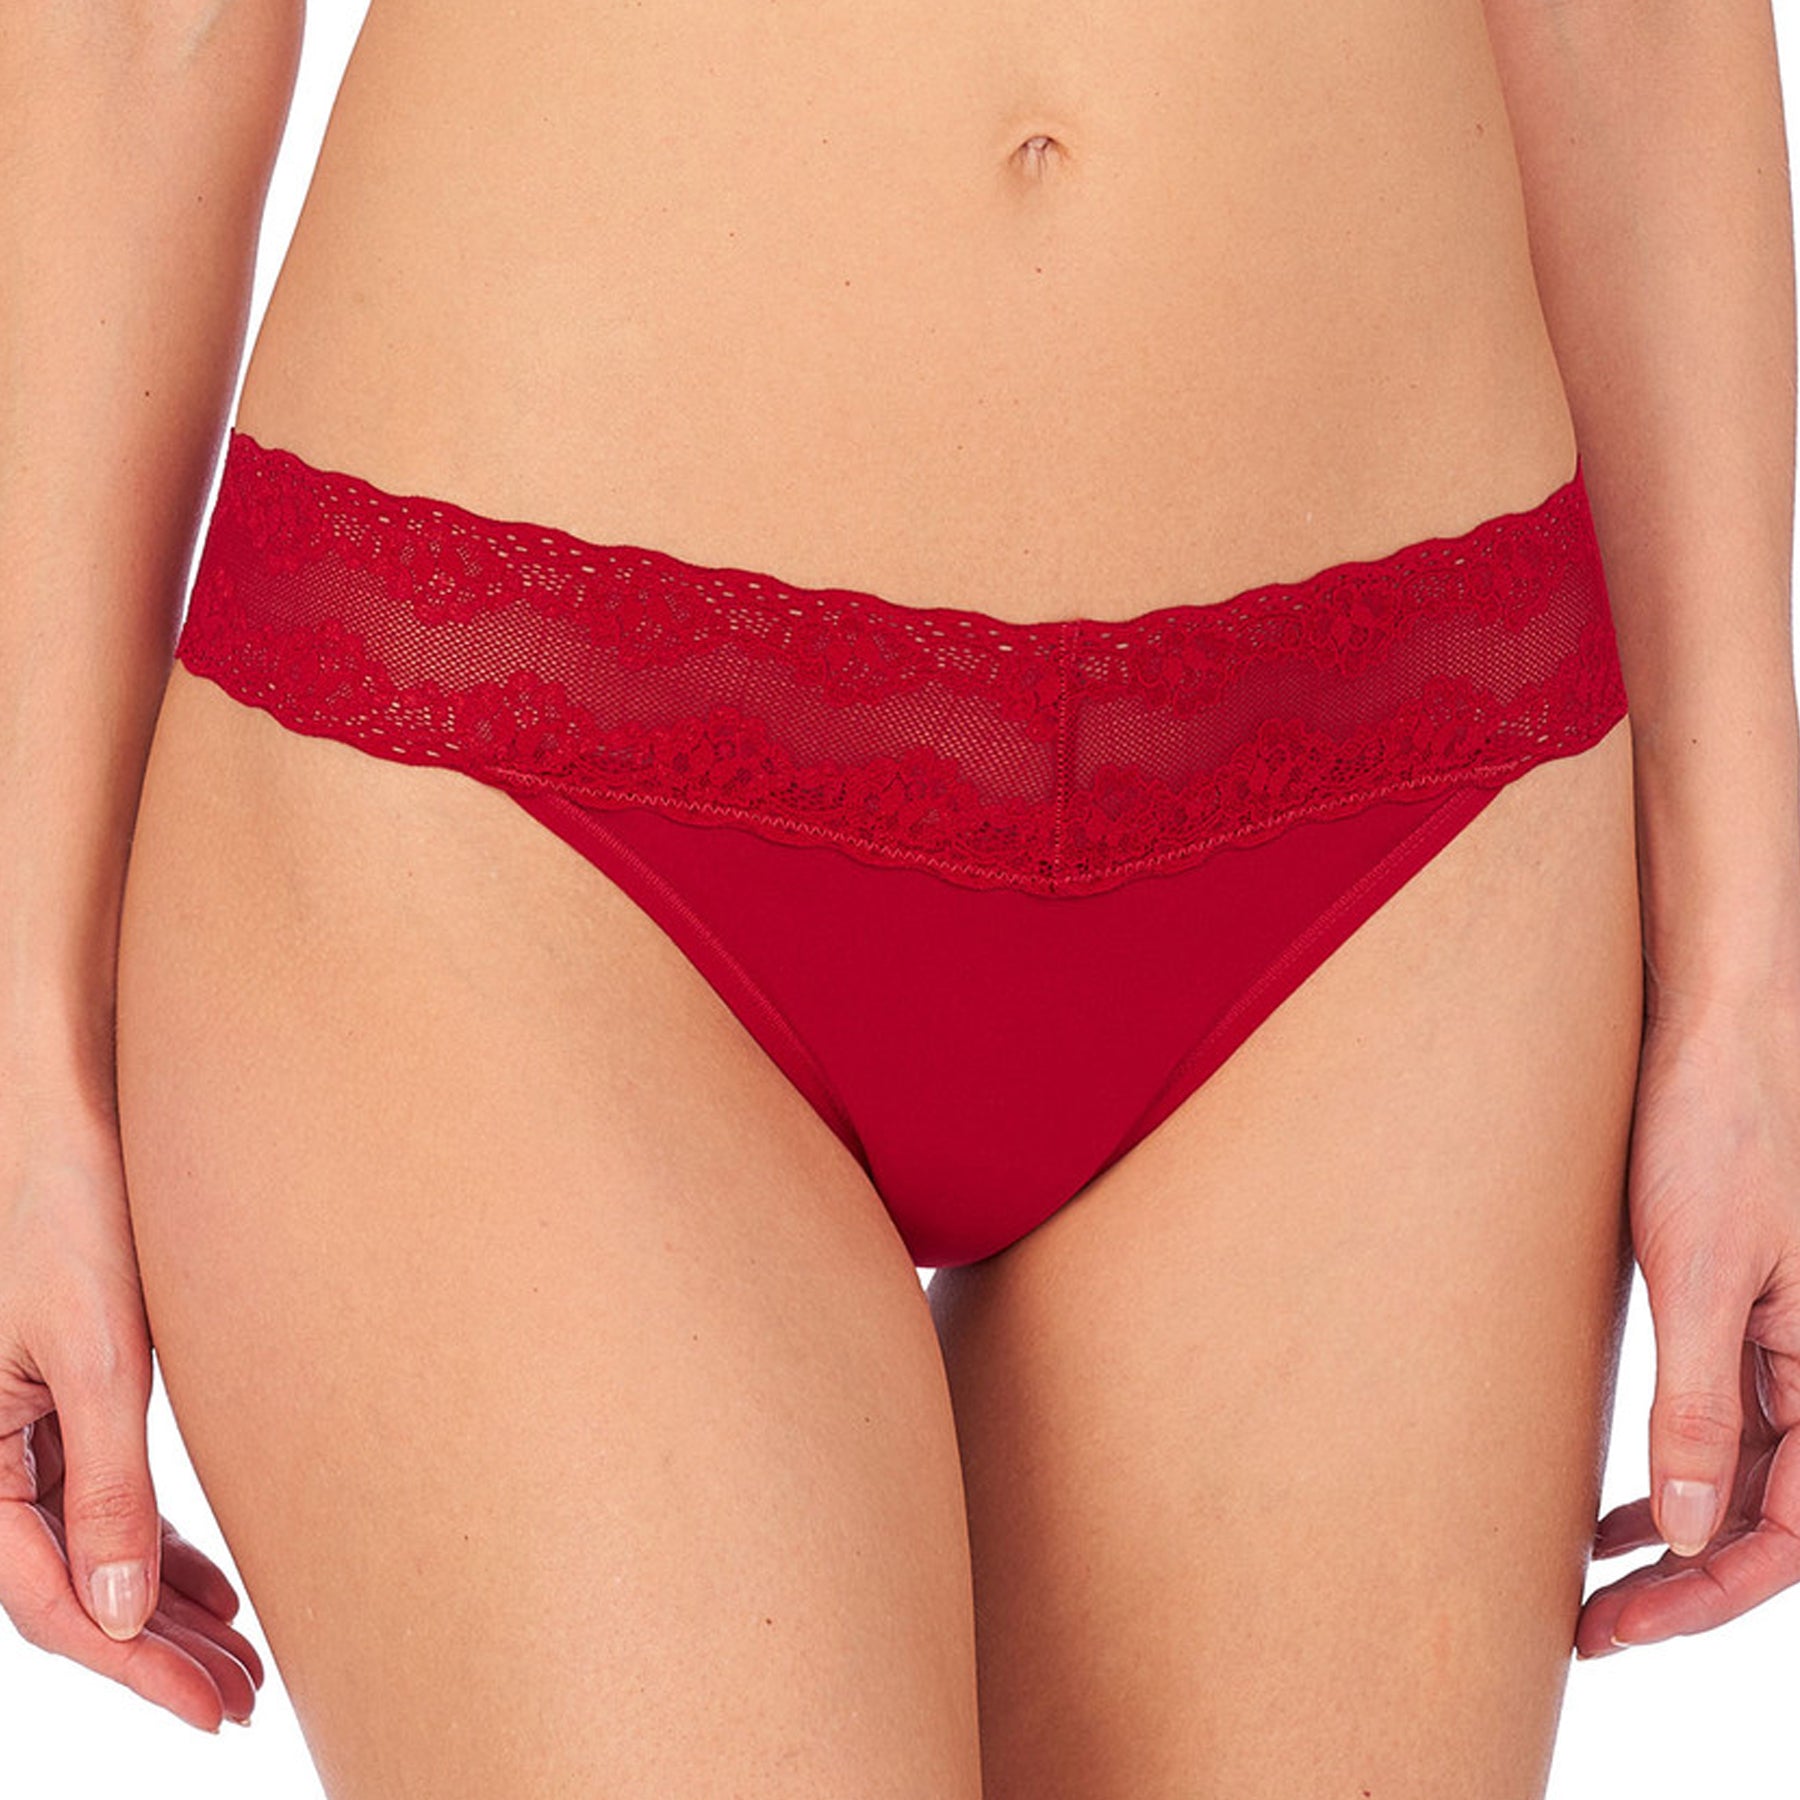 me. by bendon - Women's Red Thongs & G-Strings - Perfectly Me Thong Briefs  - Size S at The Iconic - ShopStyle